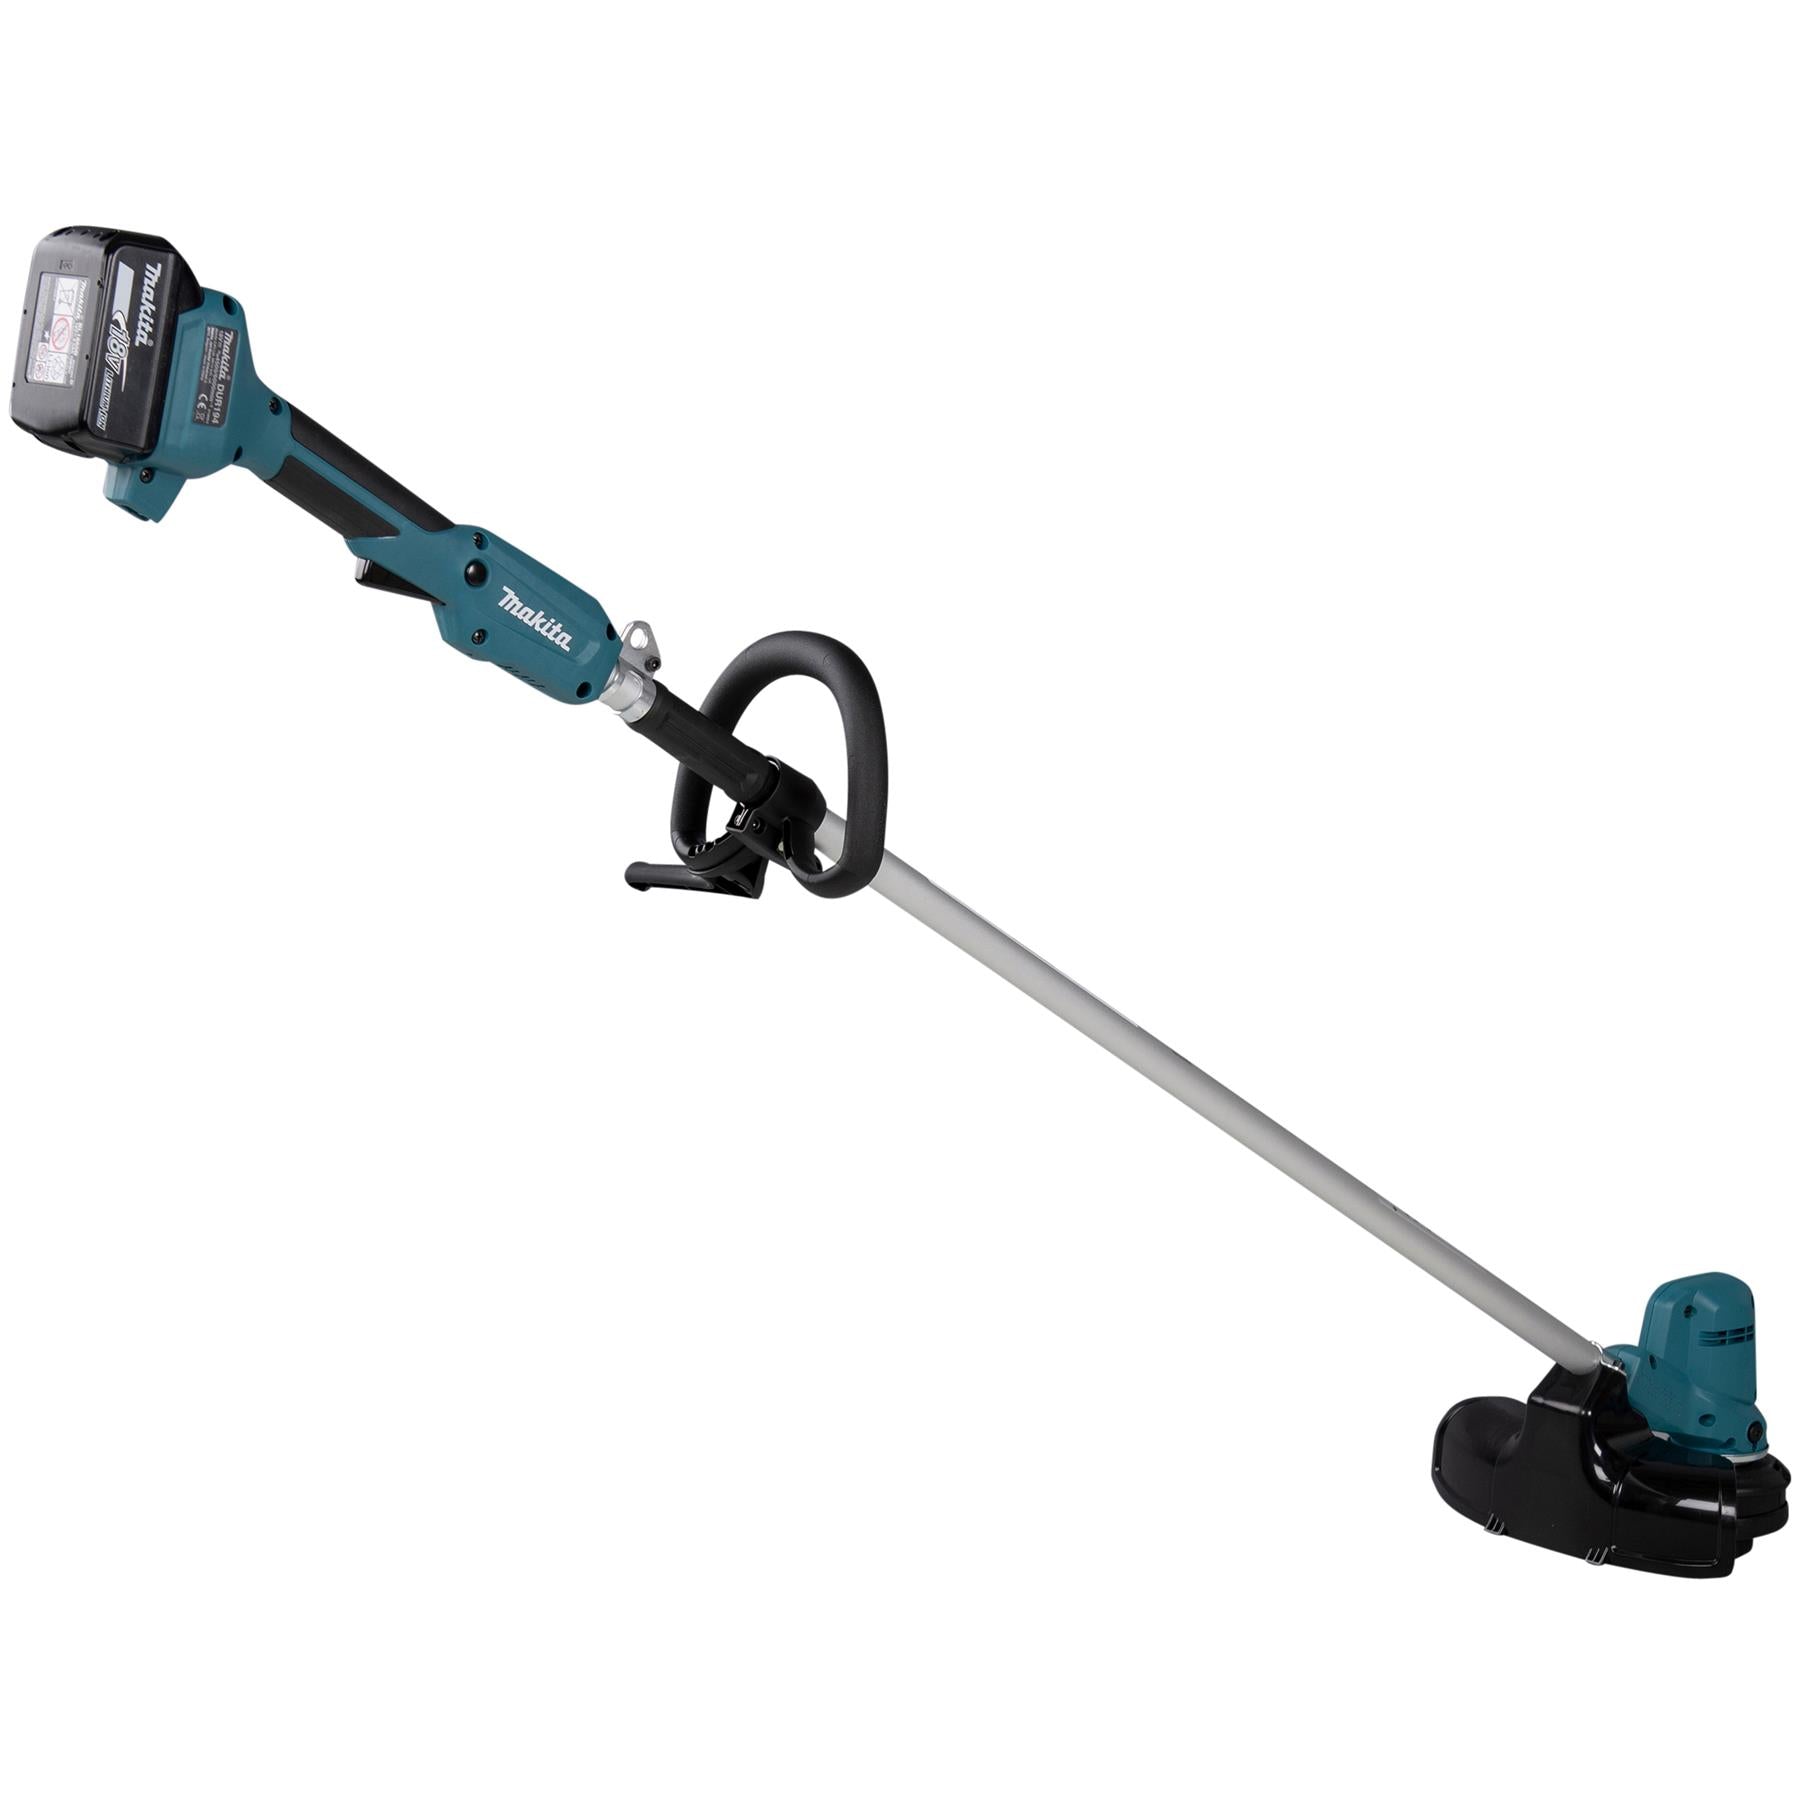 Makita Grass Trimmer Strimmer Kit 18V LXT Brushless Cordless Garden Lawn Strimming 5Ah Battery and Charger DUR194RTX2